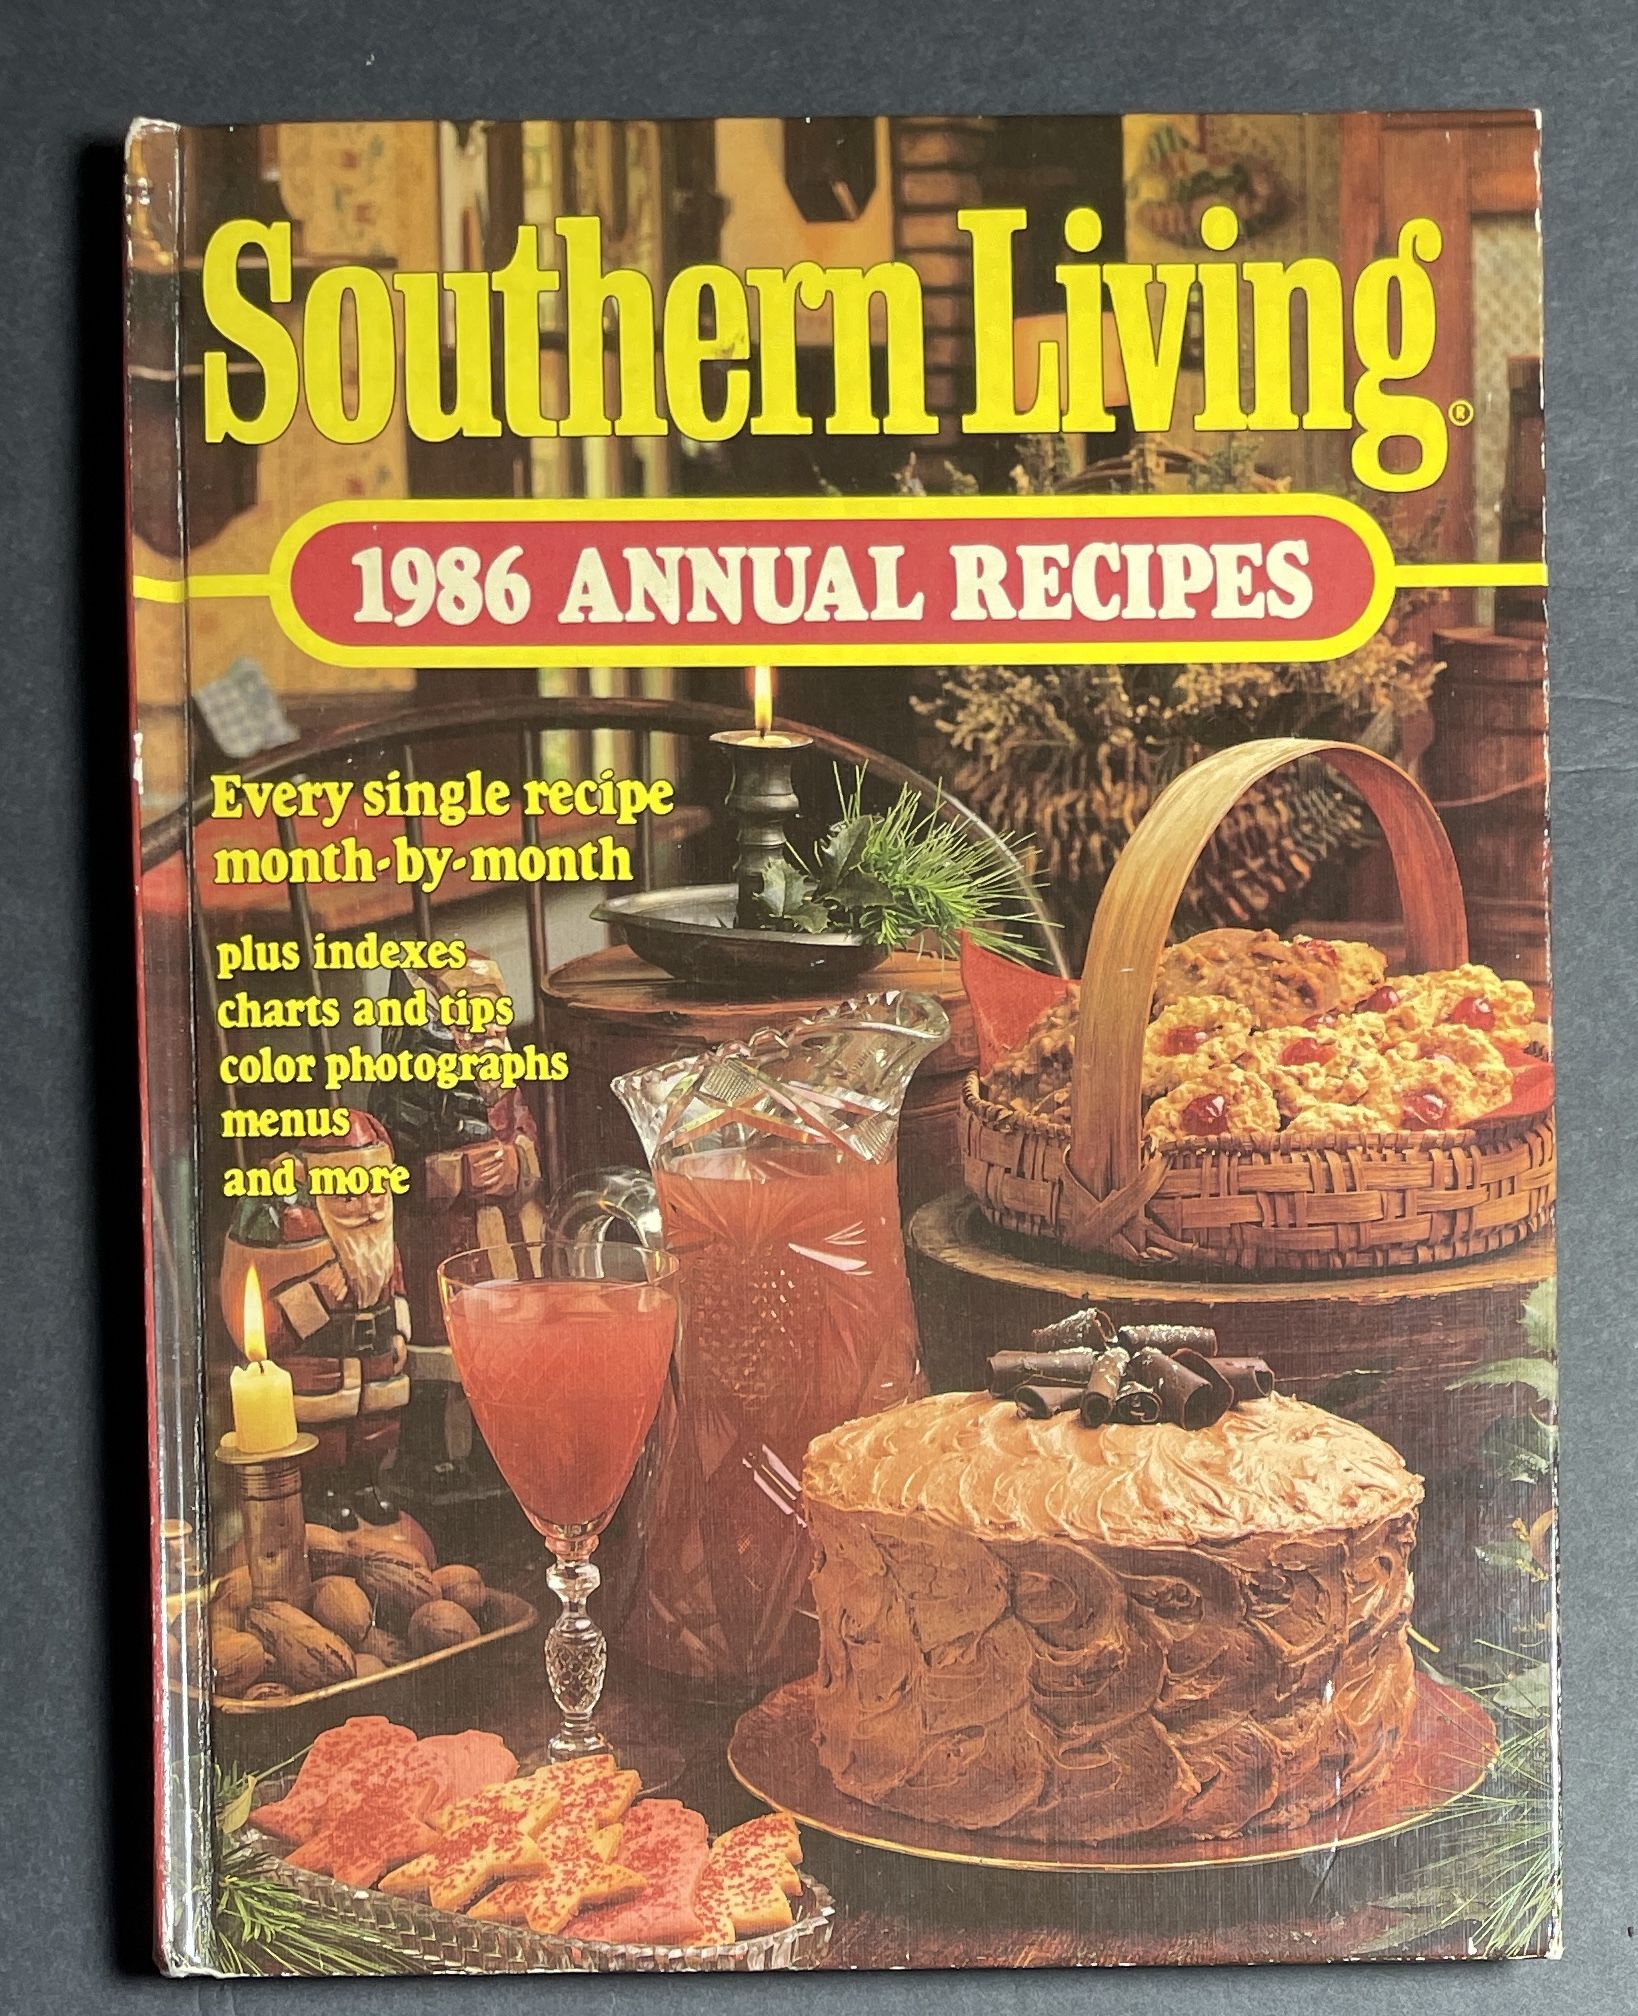  Vintage Southern Living 1986 Annual Recipes (1986, Hardcover)  